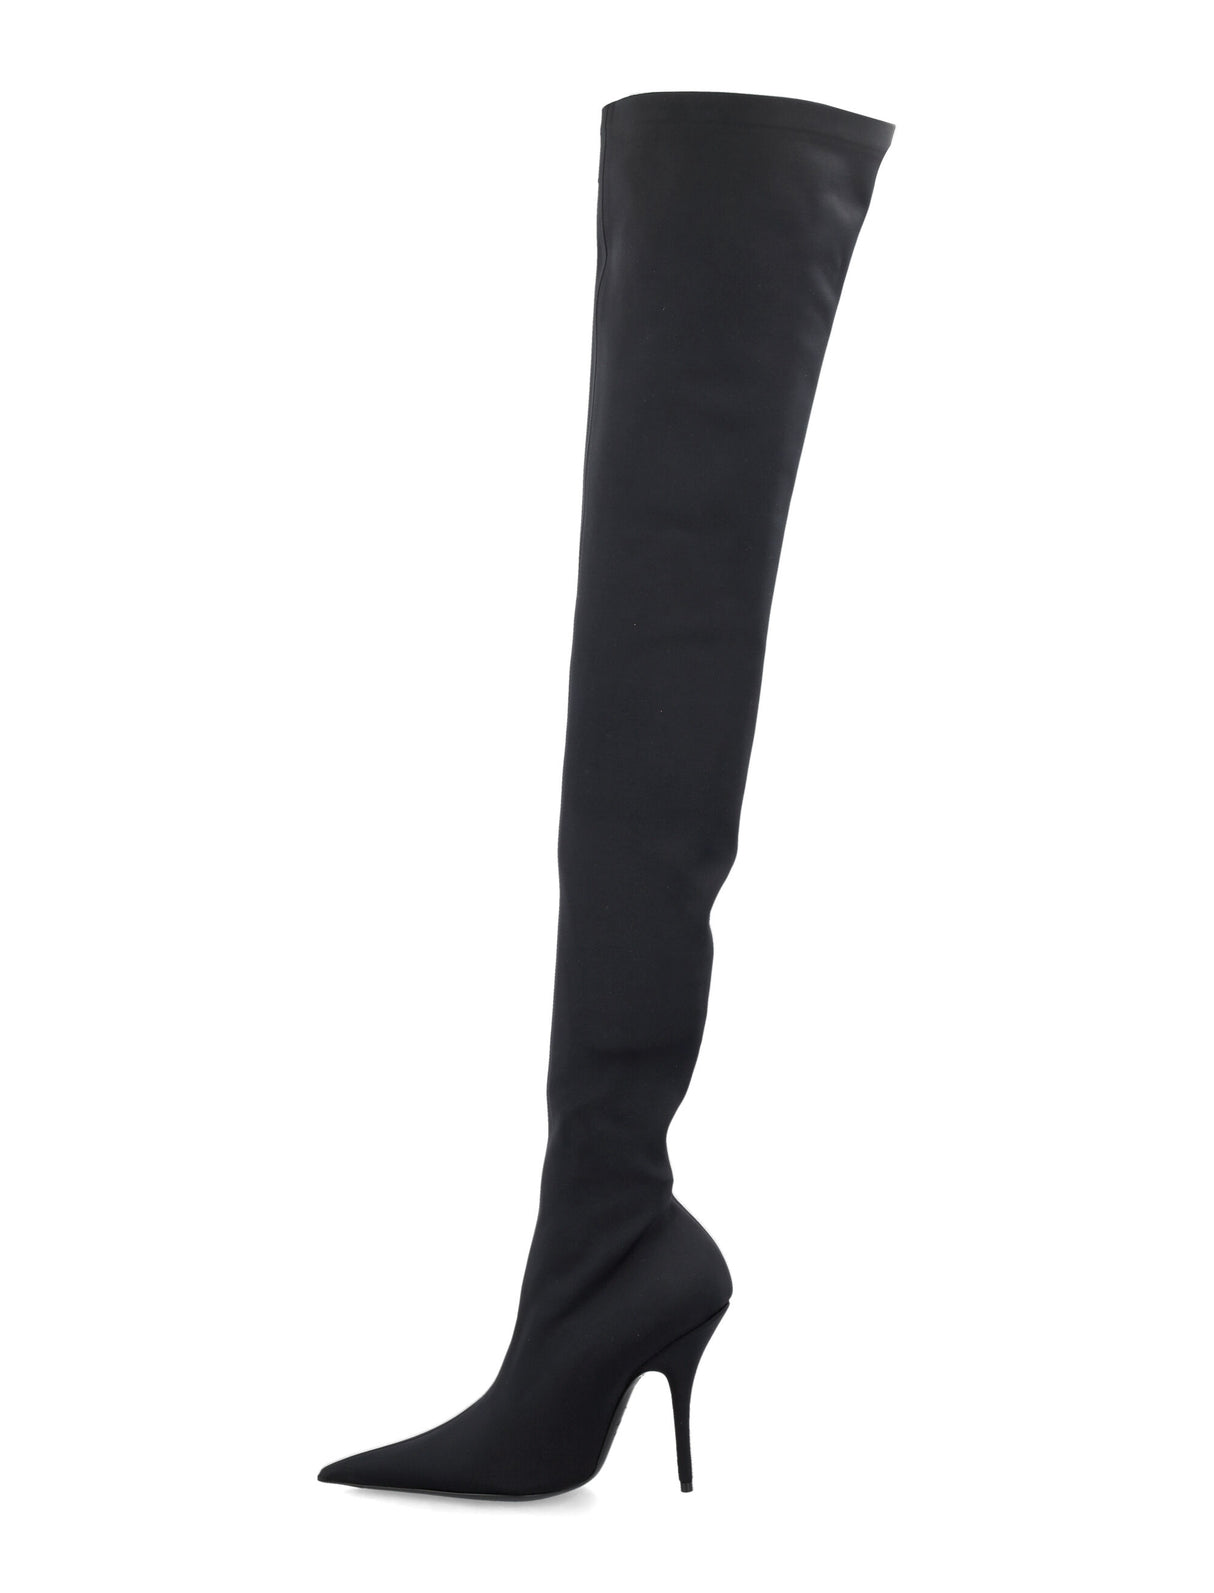 Black Over-The-Knee Boots with High Shaft and Stiletto Heel